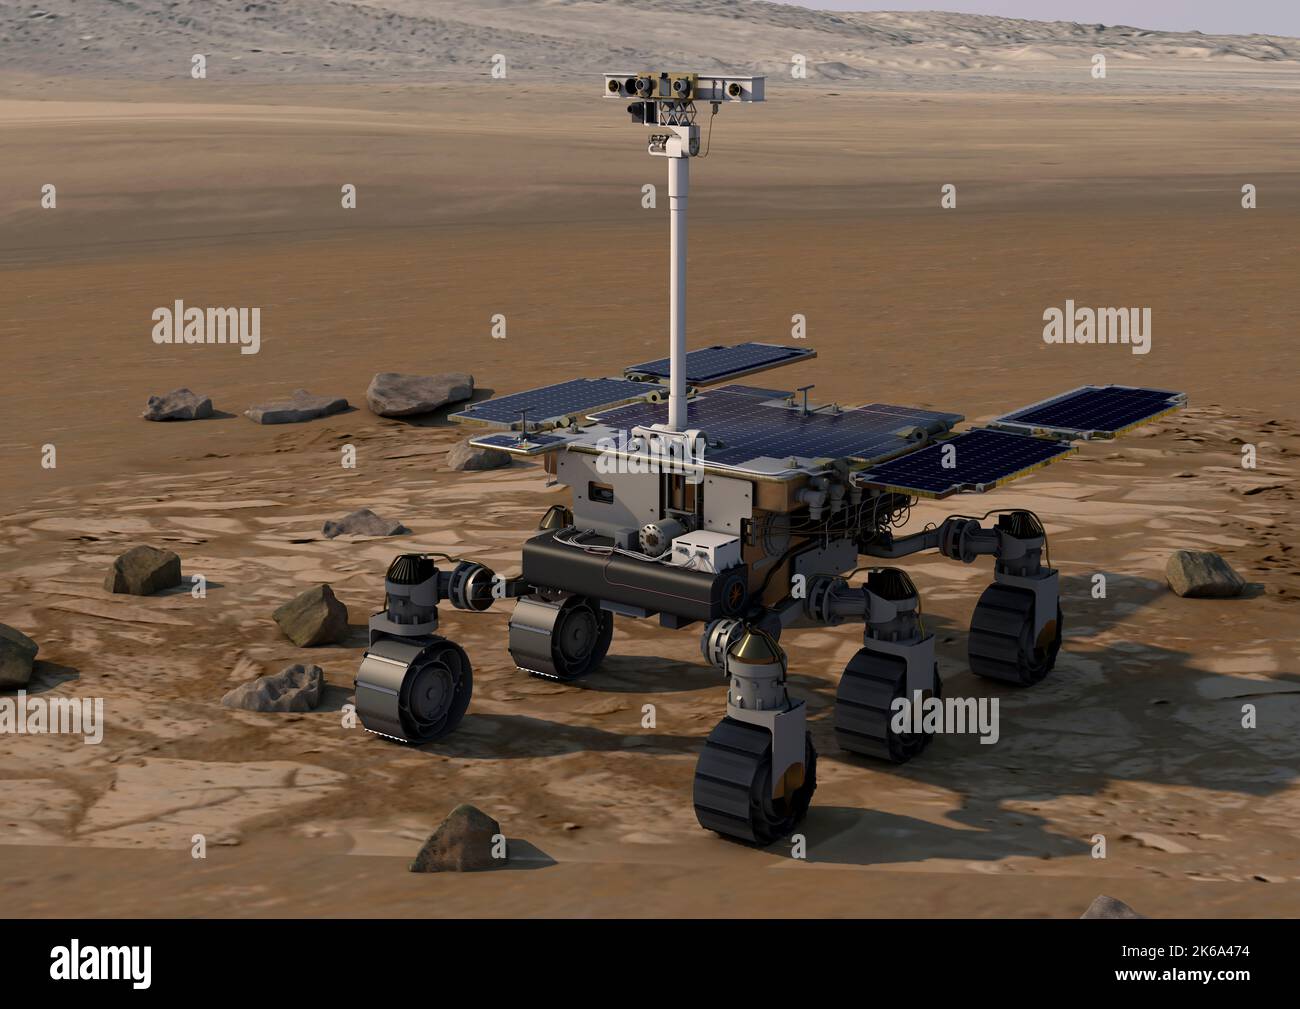 Artist's concept of the Rosalind Franklin ExoMars rover on a Mars landscape. Stock Photo